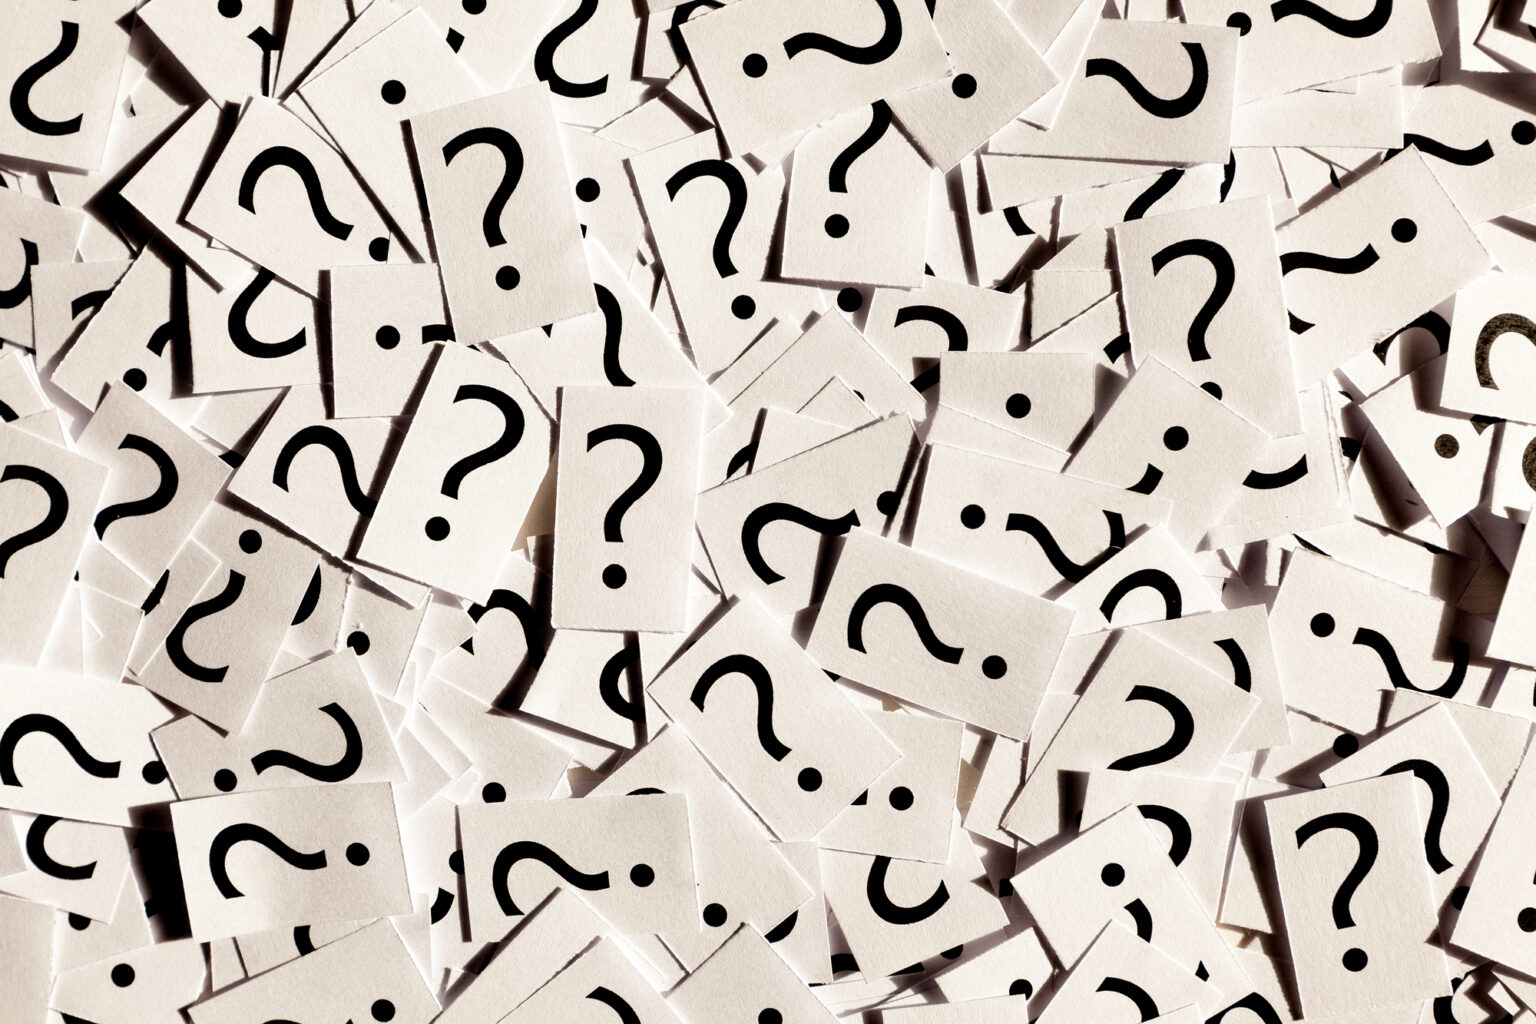 A scattered pile of paper cards, each featuring a printed question mark, scattered across the dental office reception desk.